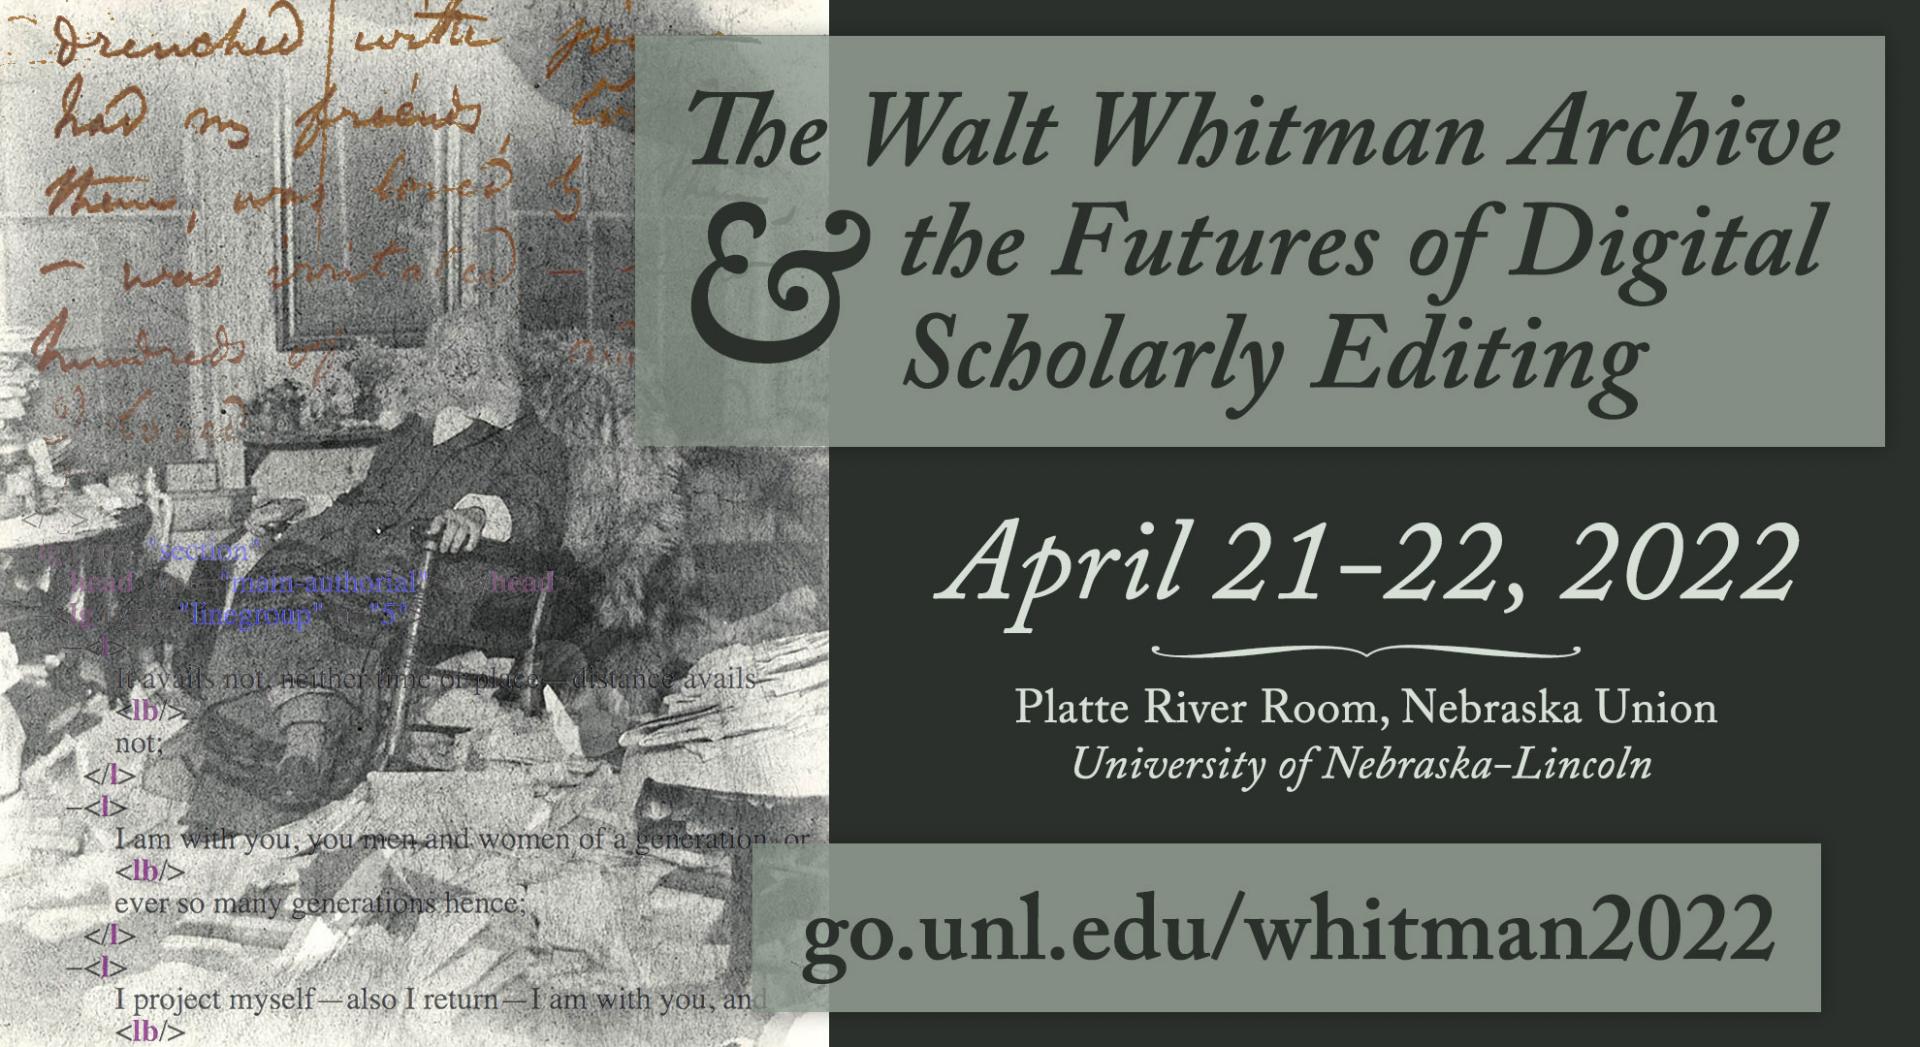 Promotional image for 2022 Walt Whitman Archive symposium - details below